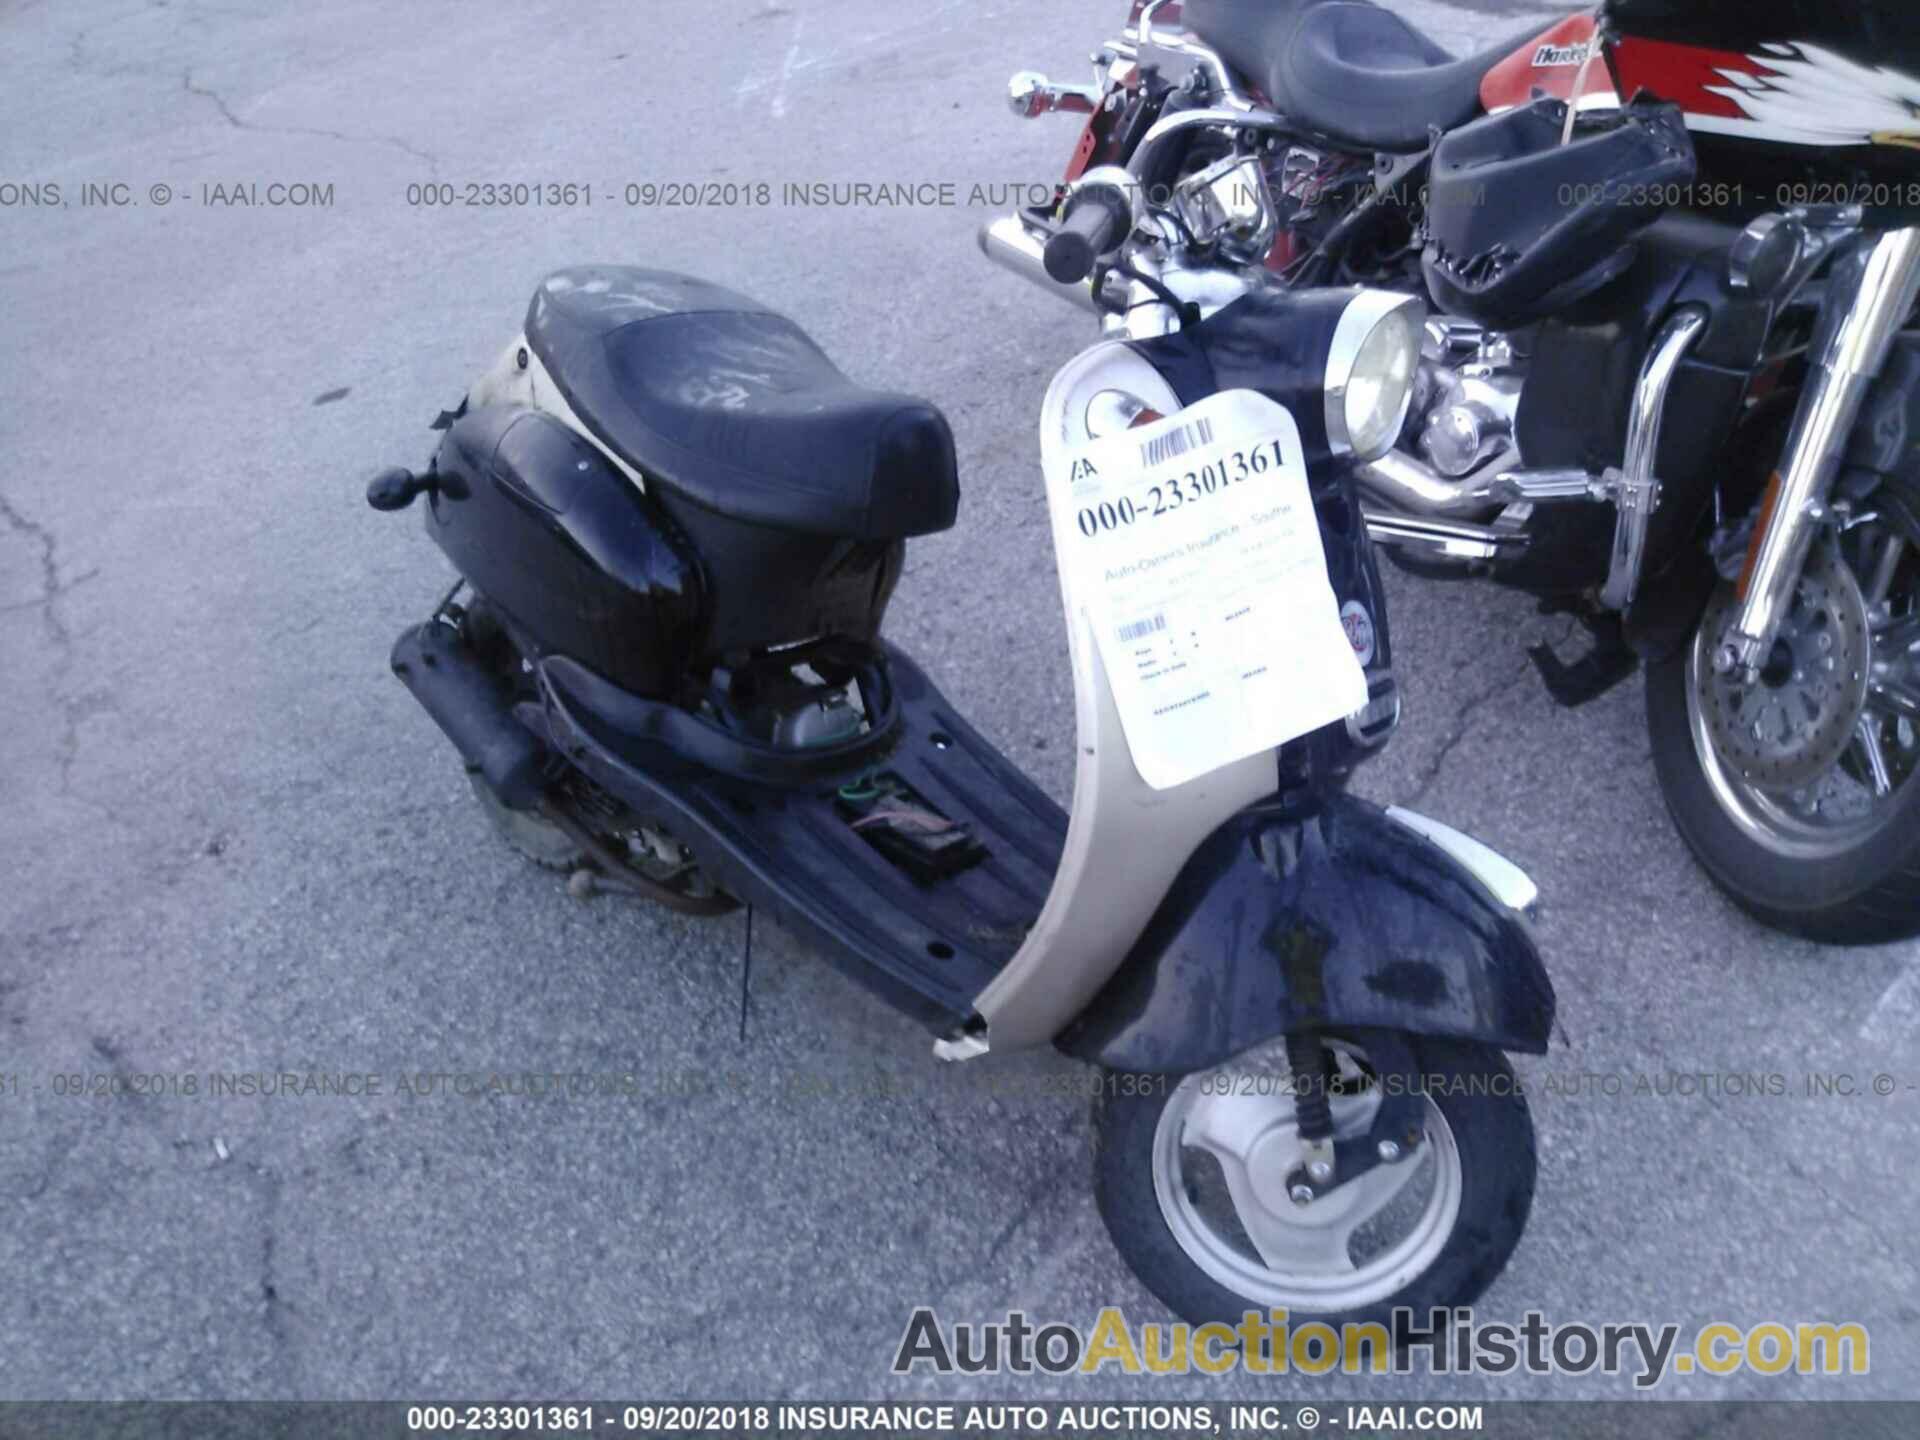 RETRO SCOOTER XB, 14BSRG2984Y001679